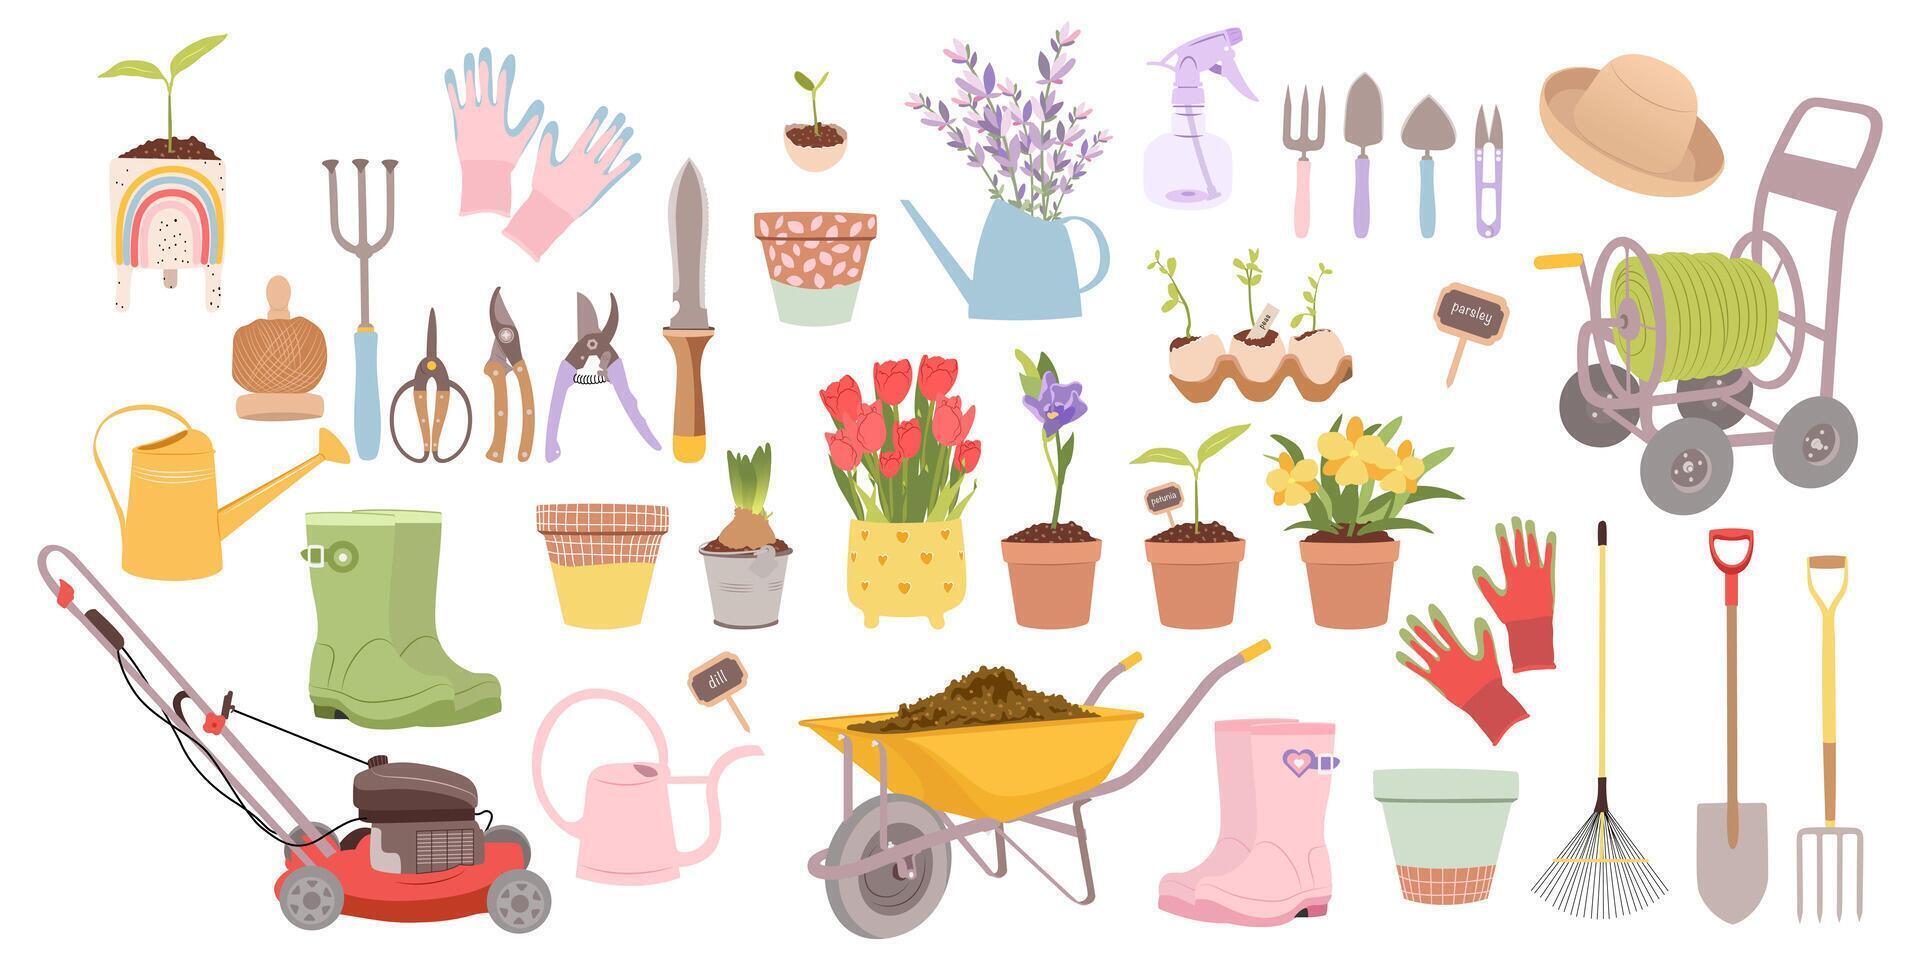 Gardening tools isolated on white background. Set include flowers, seedlings and garden equipment. vector